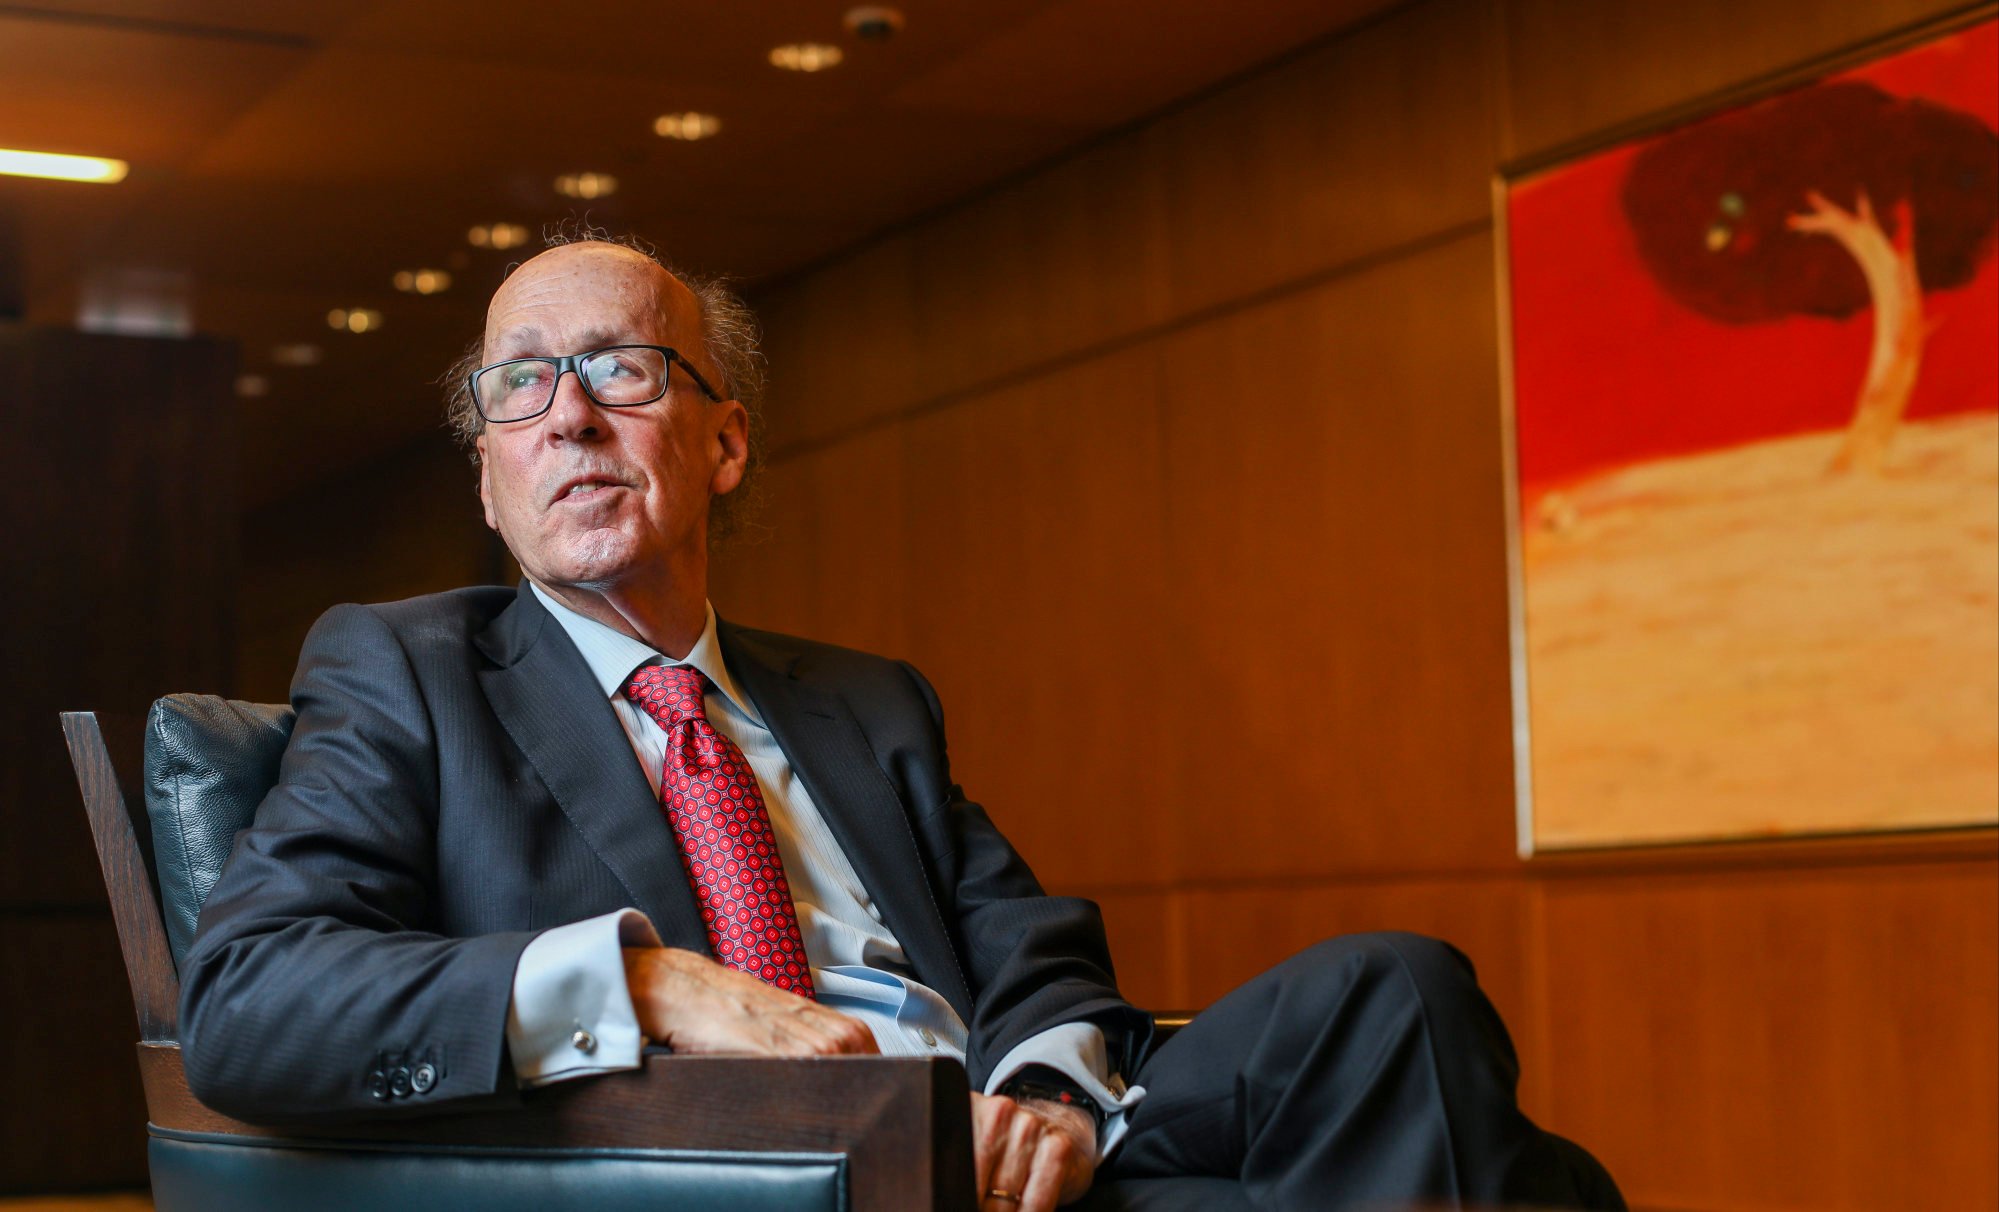 ‘hong kong is over’? economist stephen roach defends article intended as ‘wake-up call’; xinhua hits out at ‘so-called experts’ trying to ‘contain china’